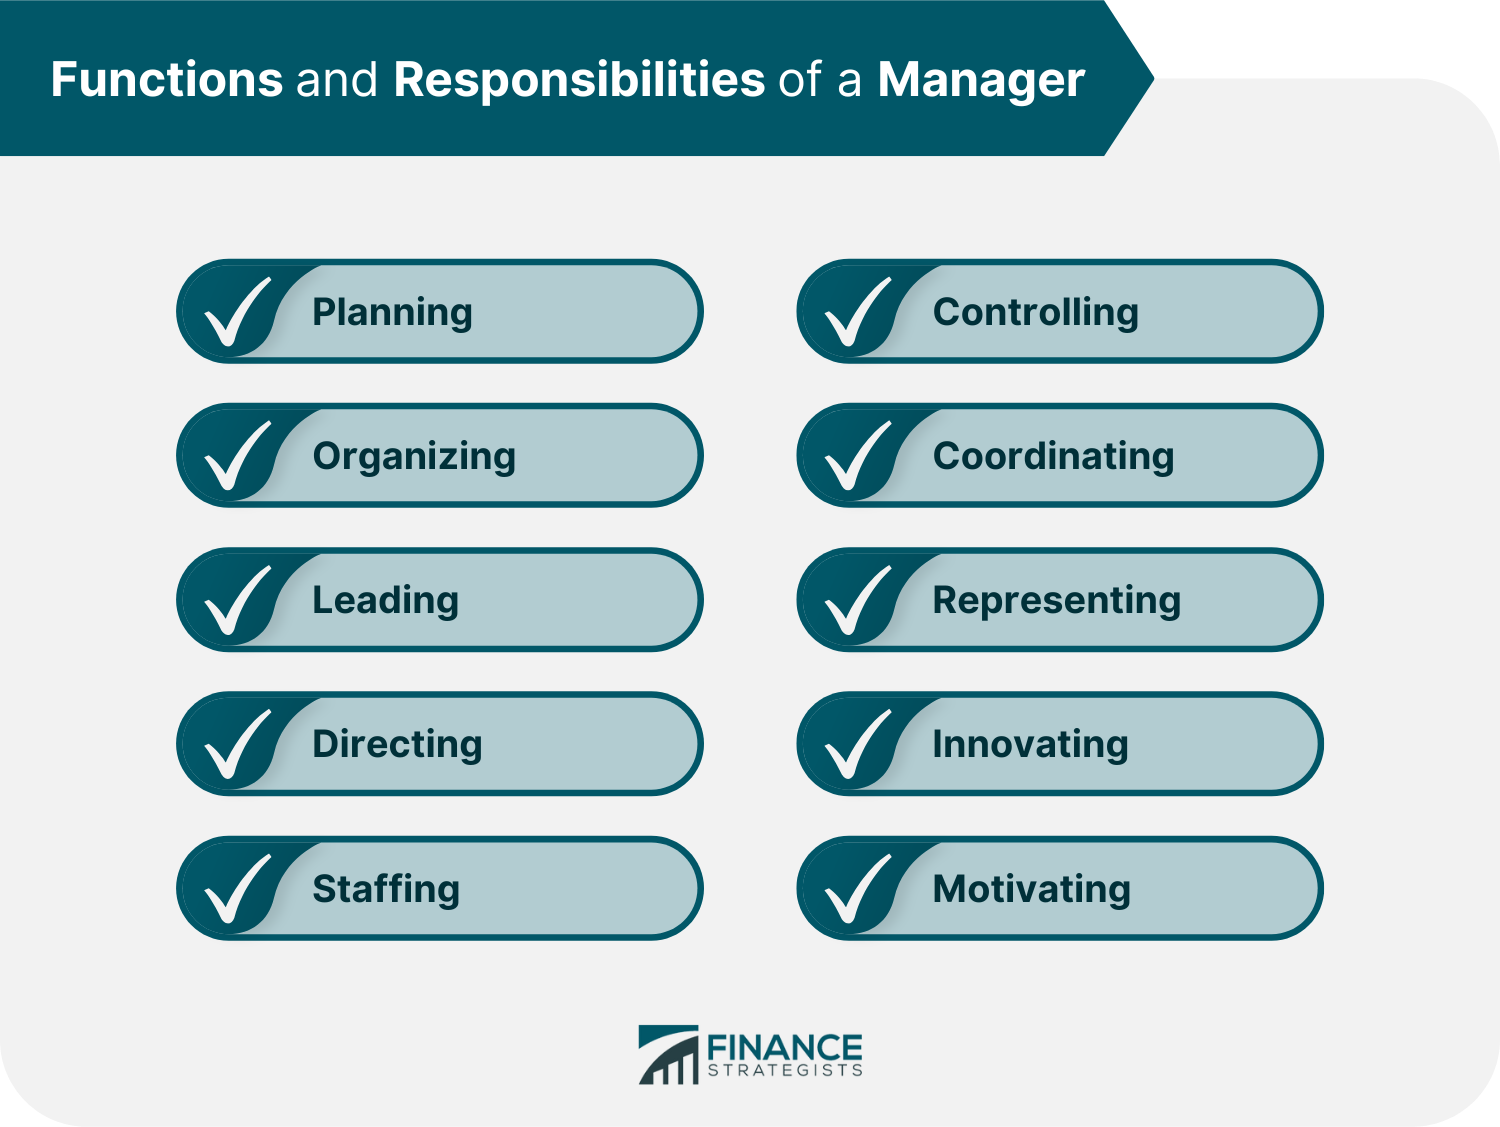 Functions and Responsibilities of a Manager